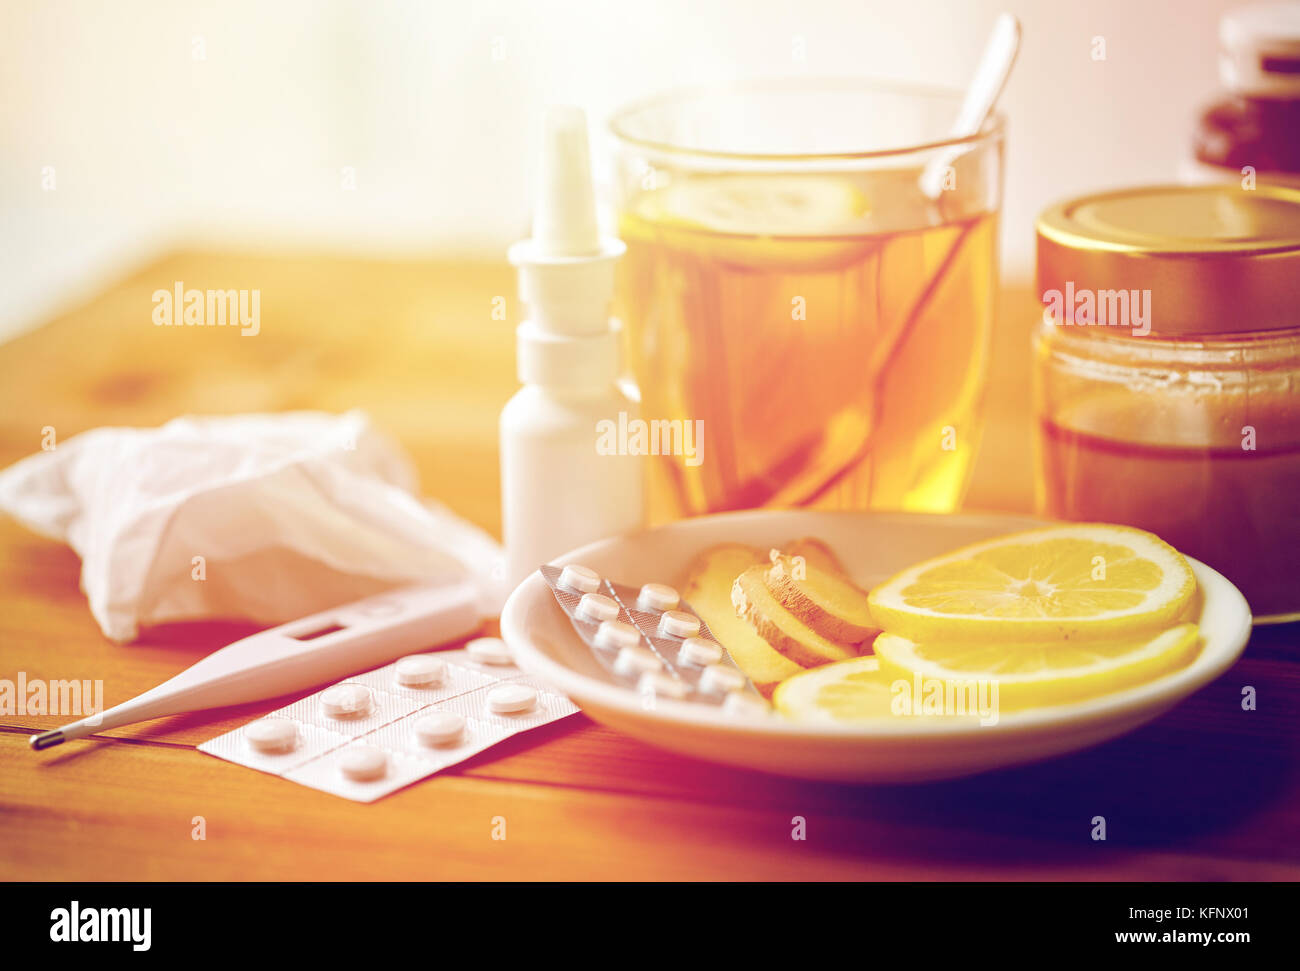 traditional medicine and drugs Stock Photo